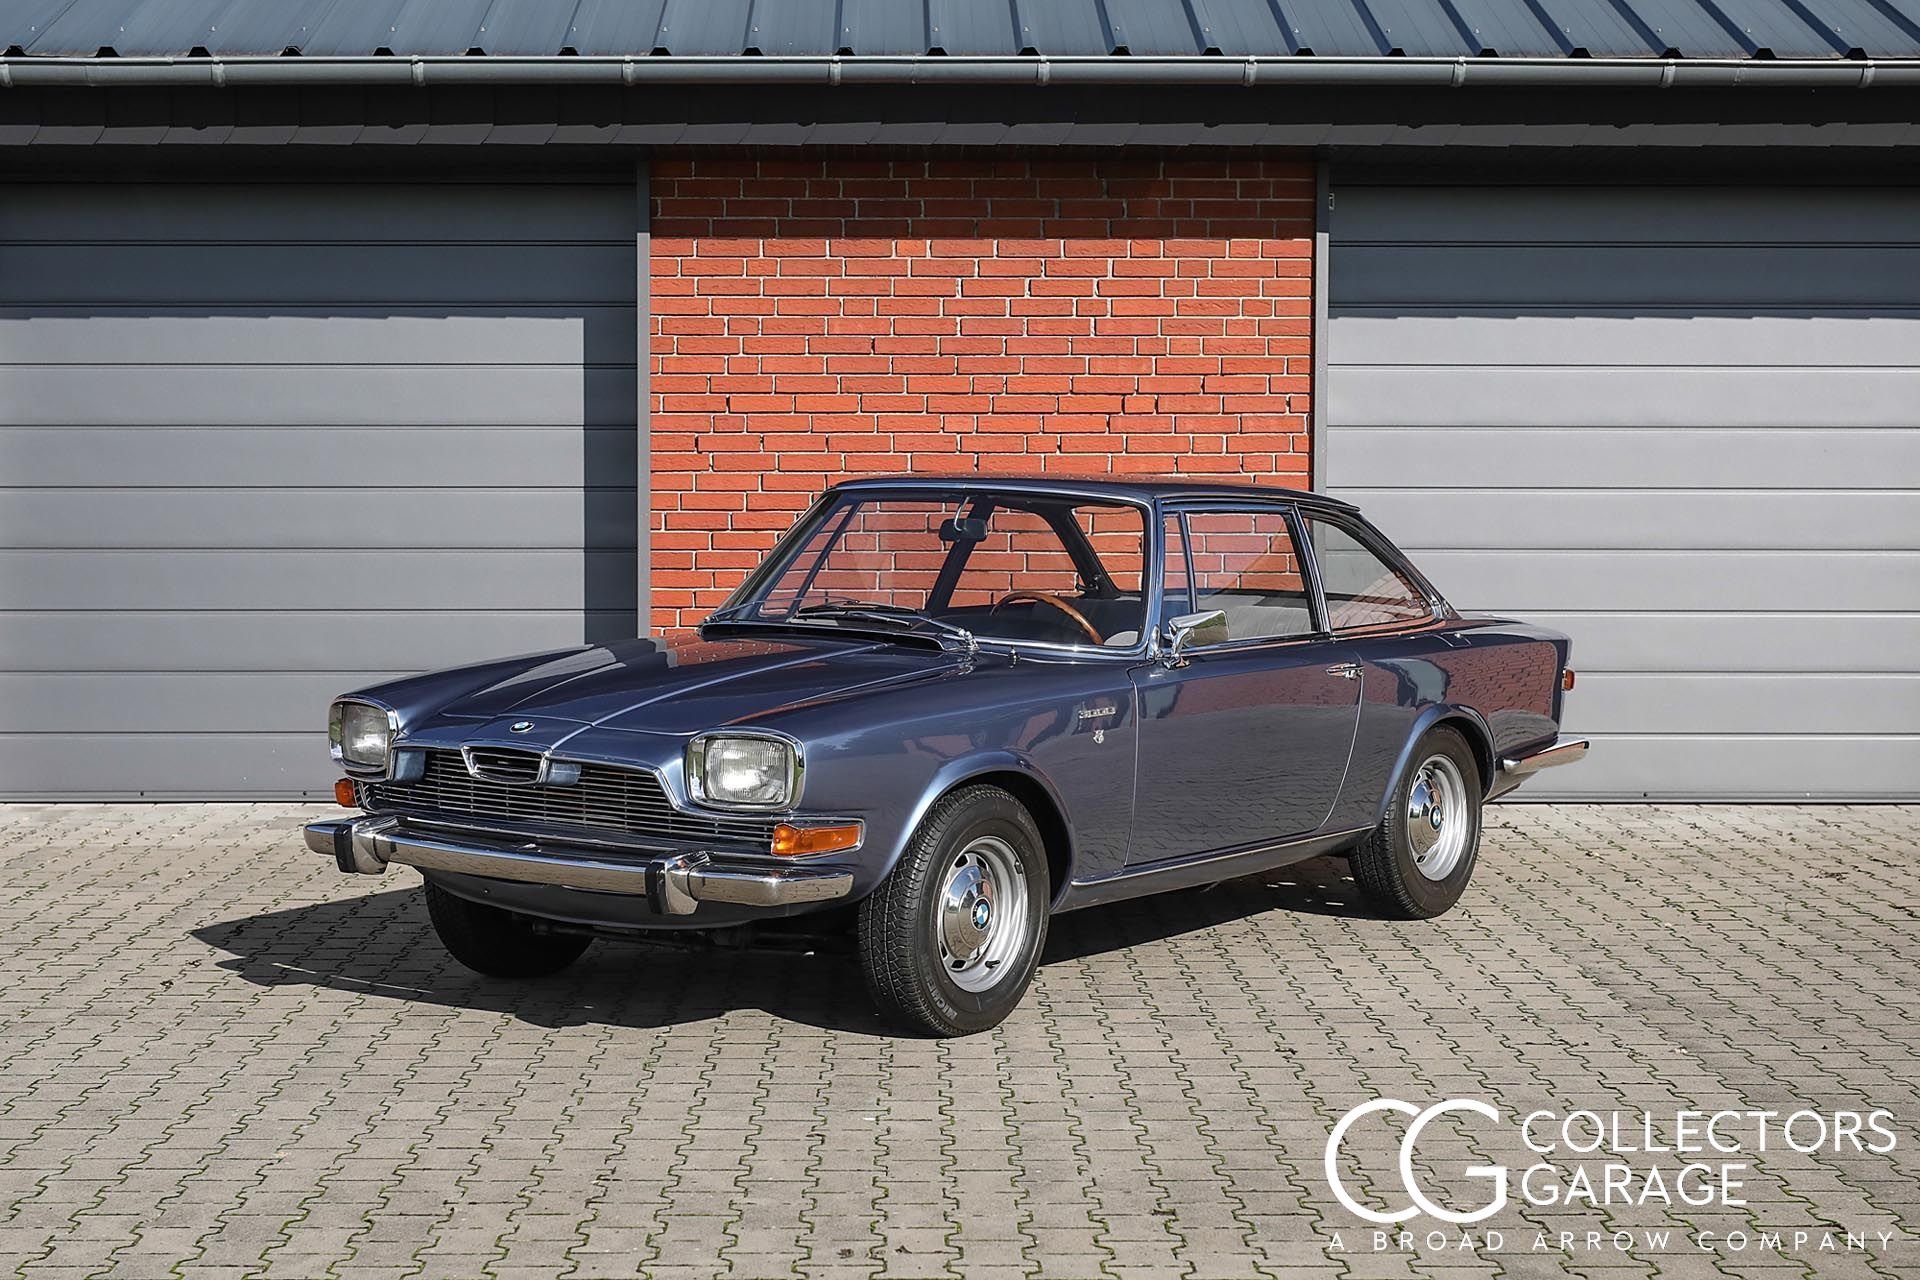 BMW Glas Classic Cars for Sale - Classic Trader